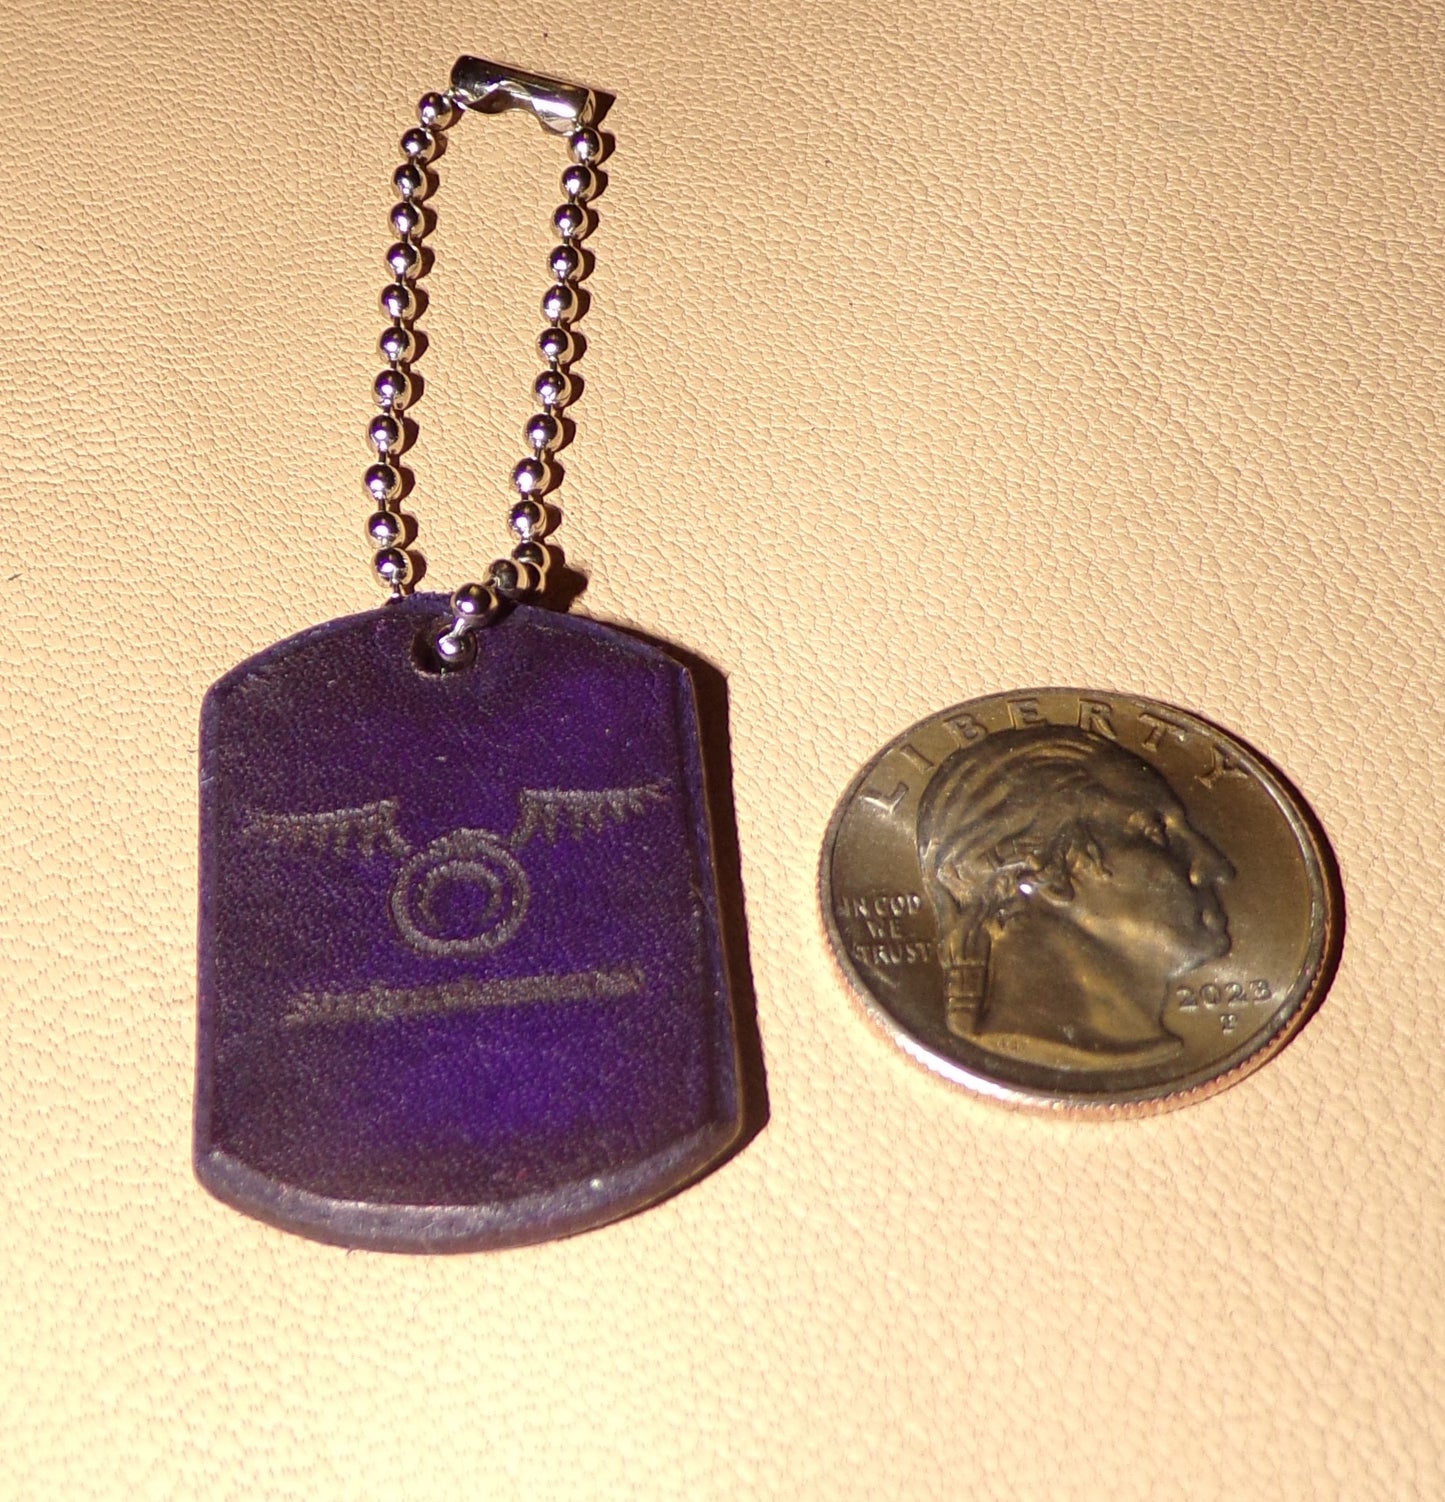 Styx Dog Tag Keychain Purple Leather small w/Ouroboros with wings